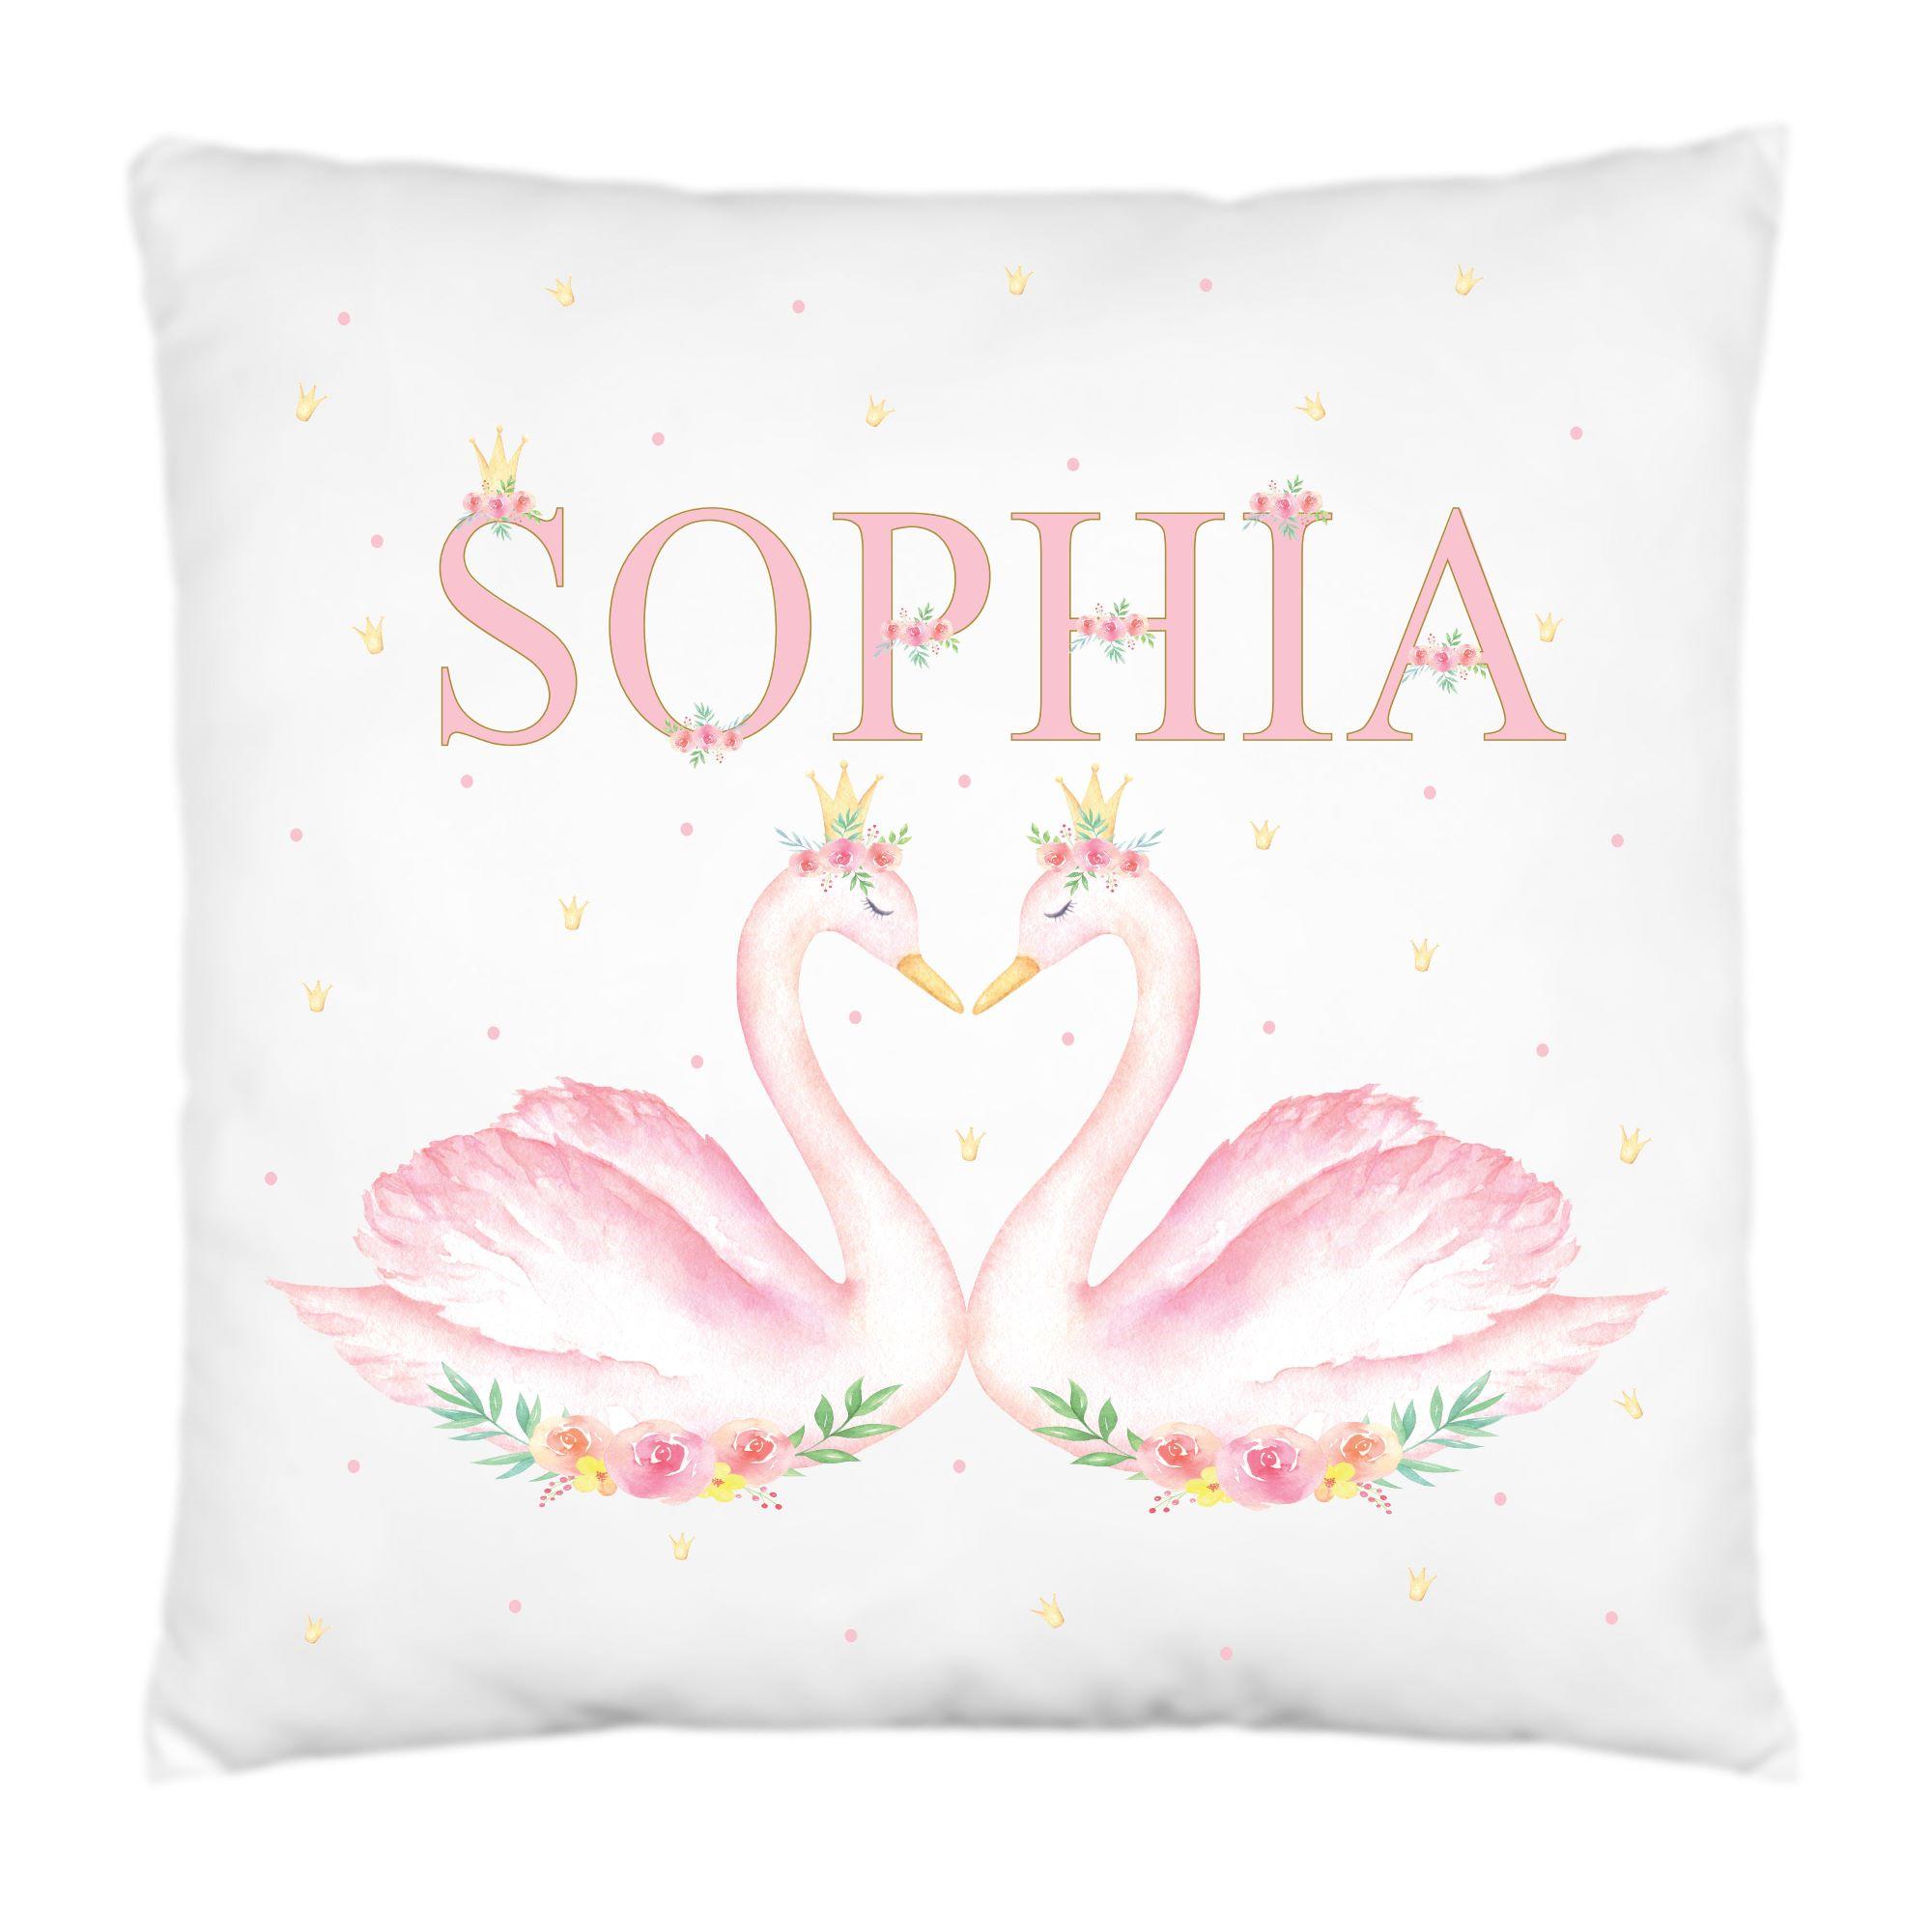 Swan Lake Personalised Cushion,Pillow,Gift For Ballerina or Dancer,.Ballet Themed Pink Girl's Bedroom Accessory